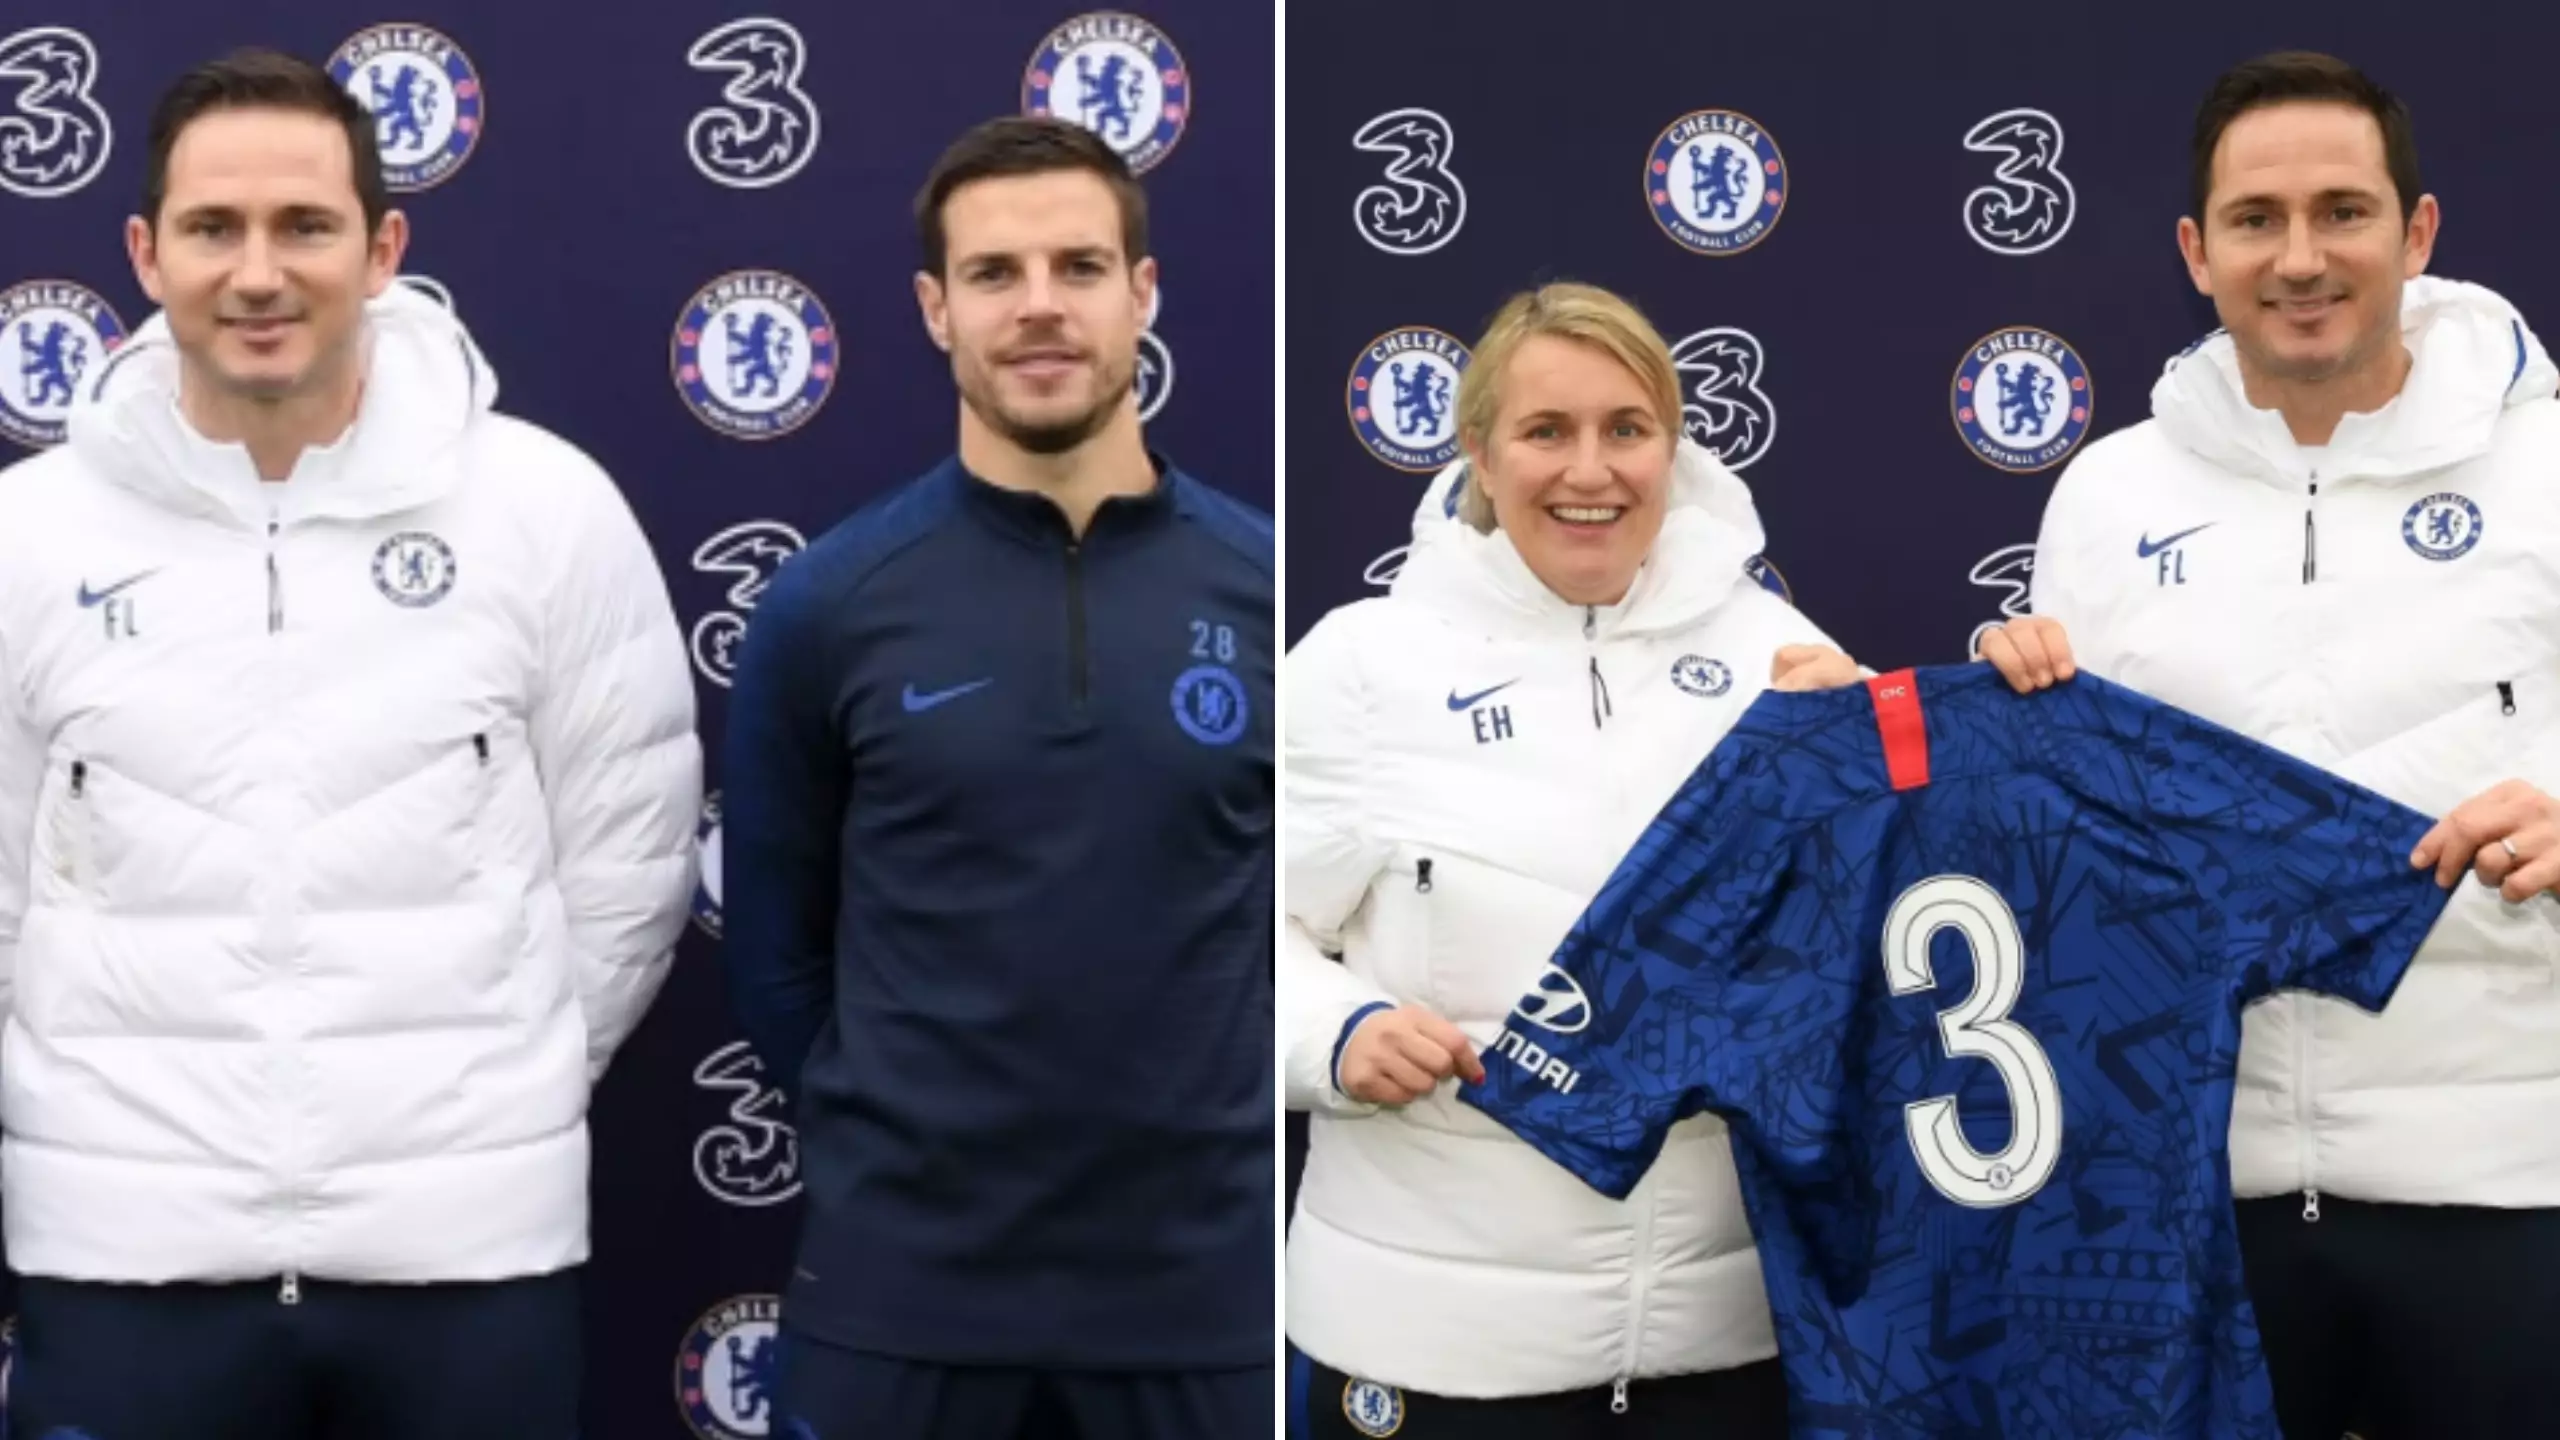 Chelsea Brutally Mocked For 'New Signing' Twitter Announcement